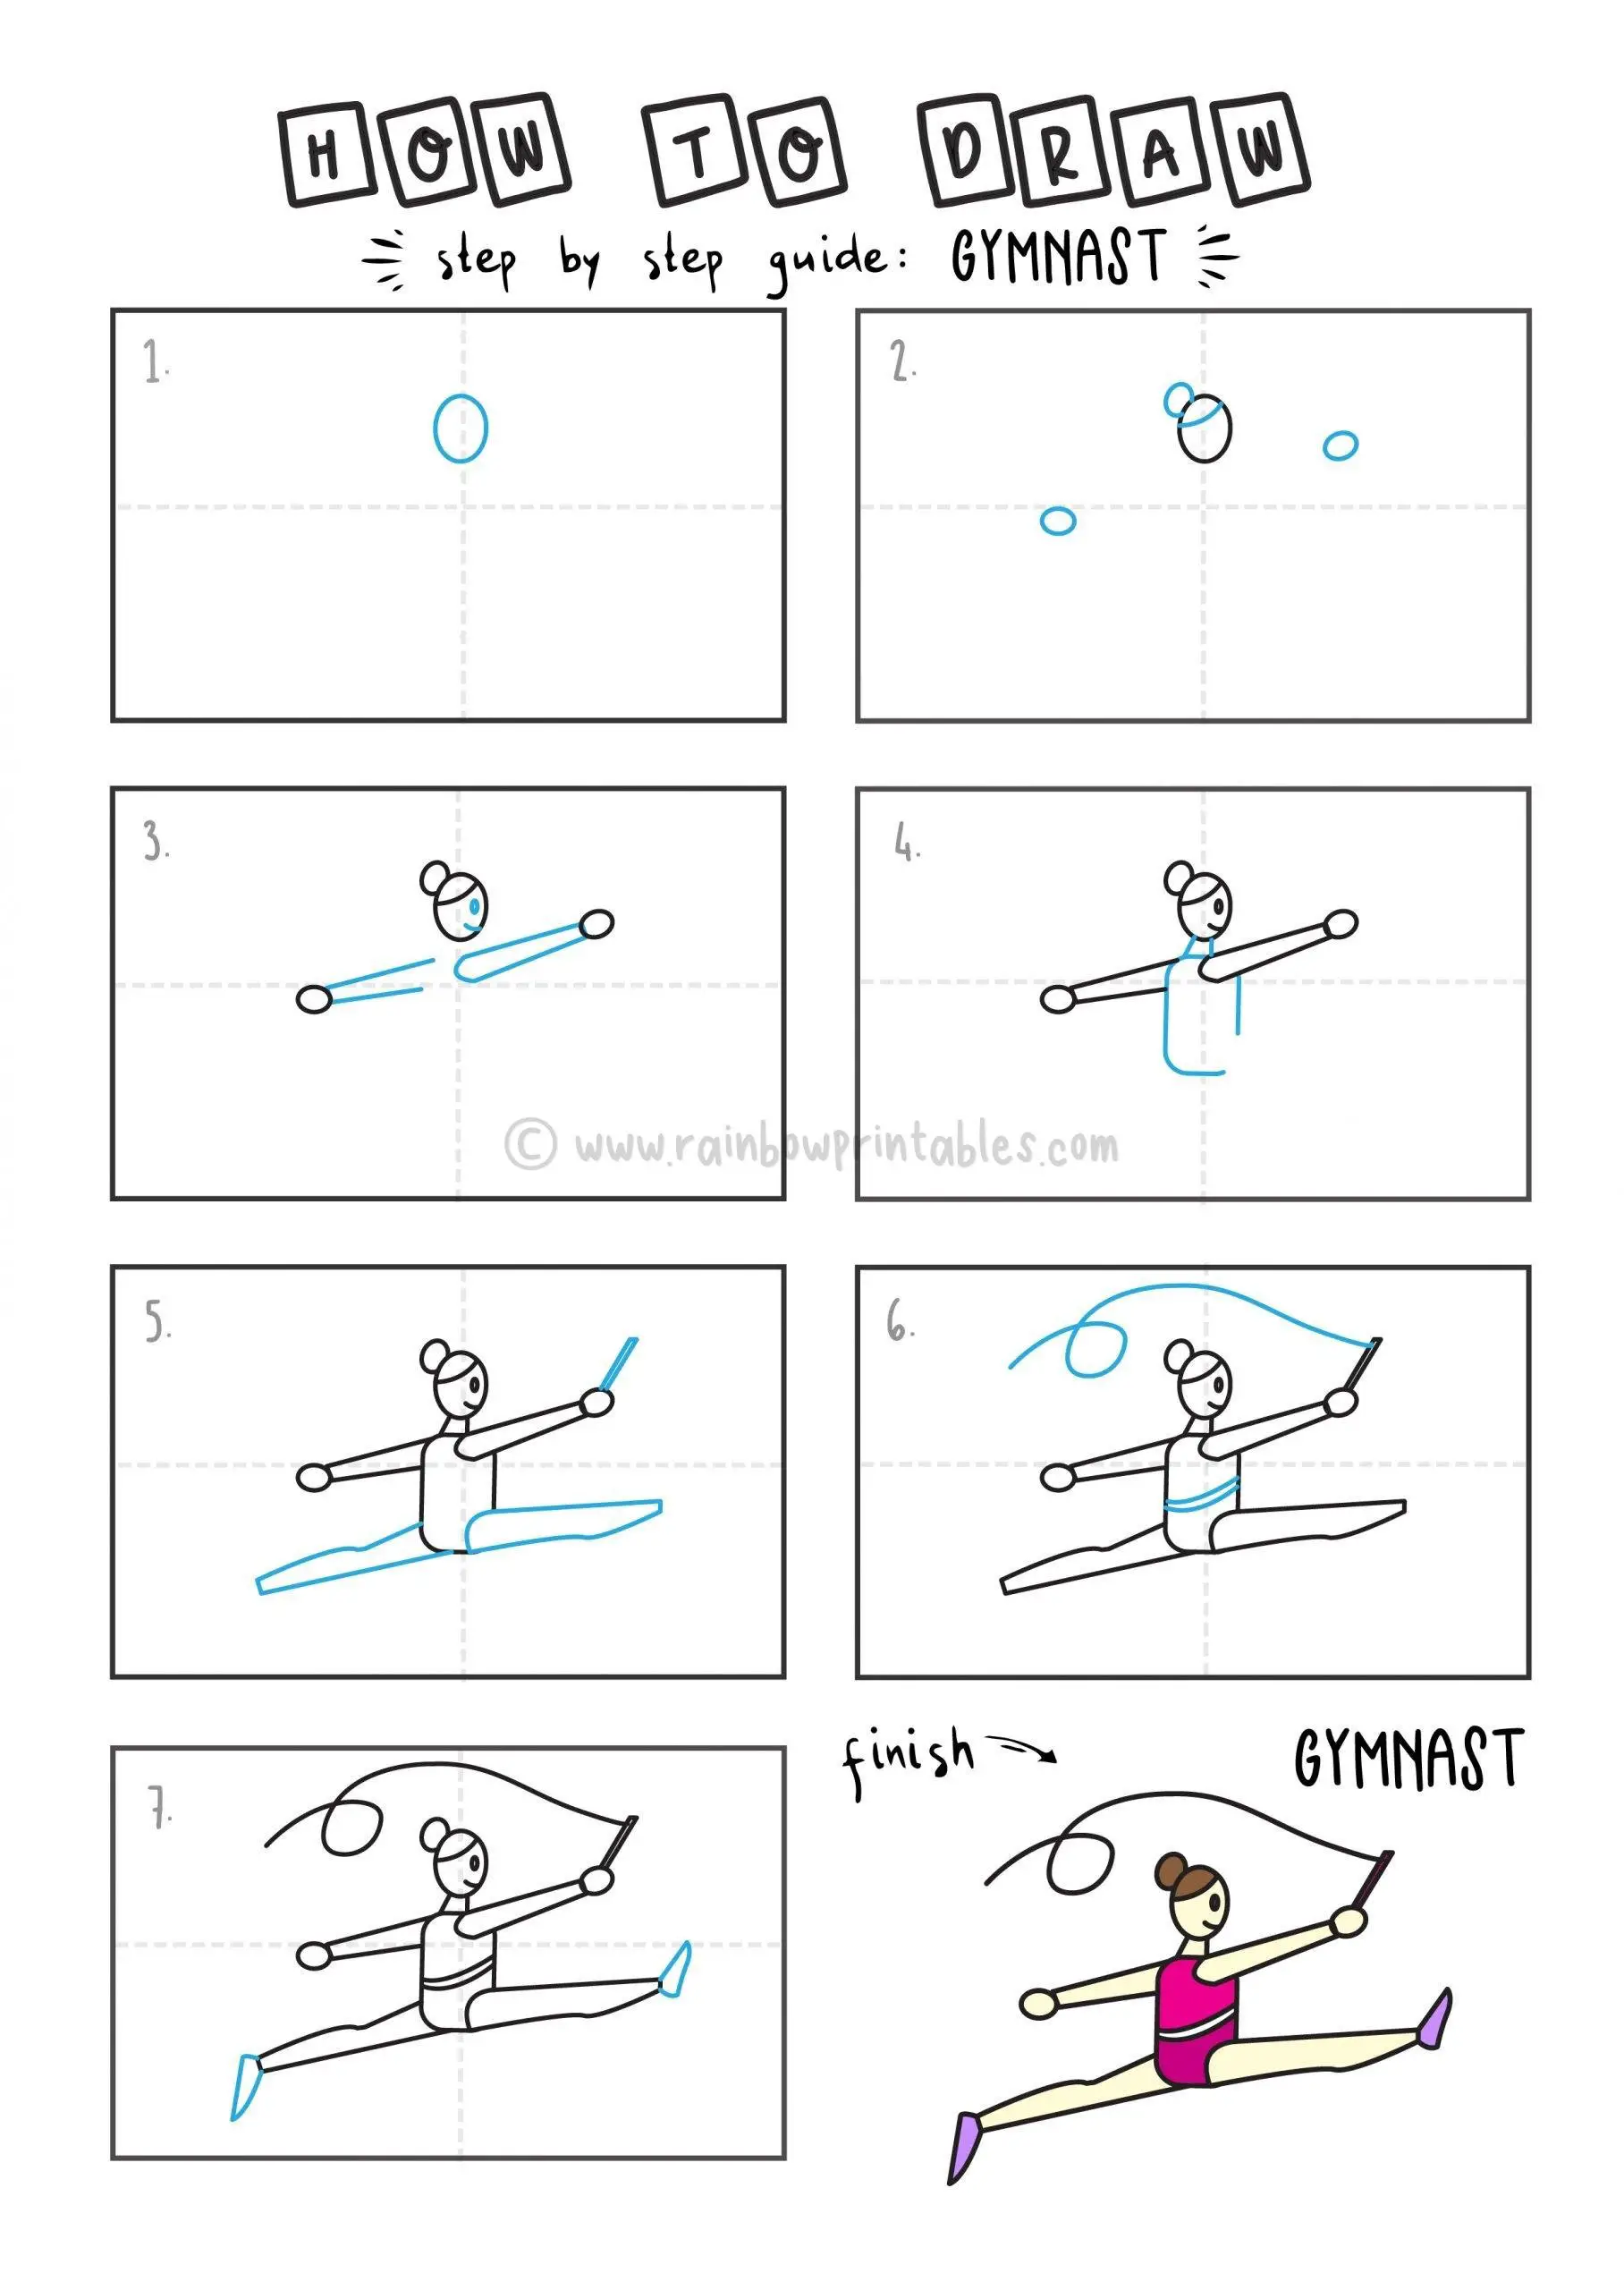 How To Draw Gymnast Sports Step by Step Art Drawing Tutorial for Young Children